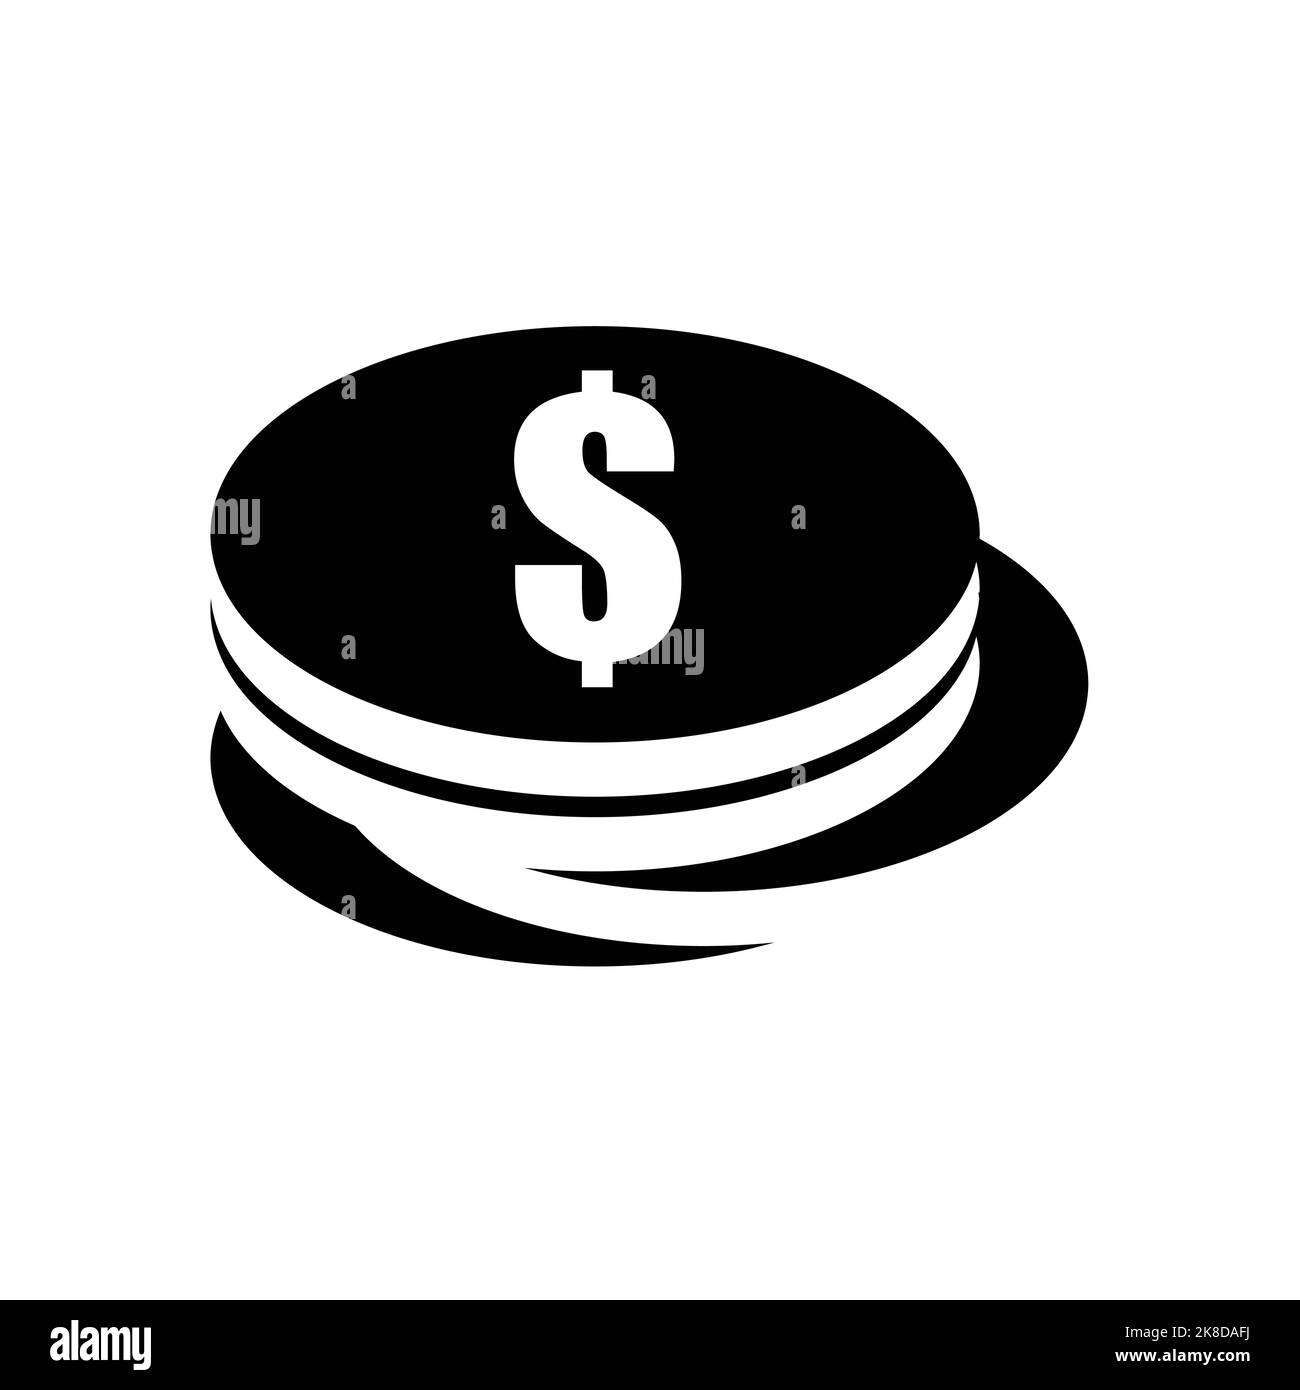 Coins icon with dollar sign vector illustration. Stock Vector